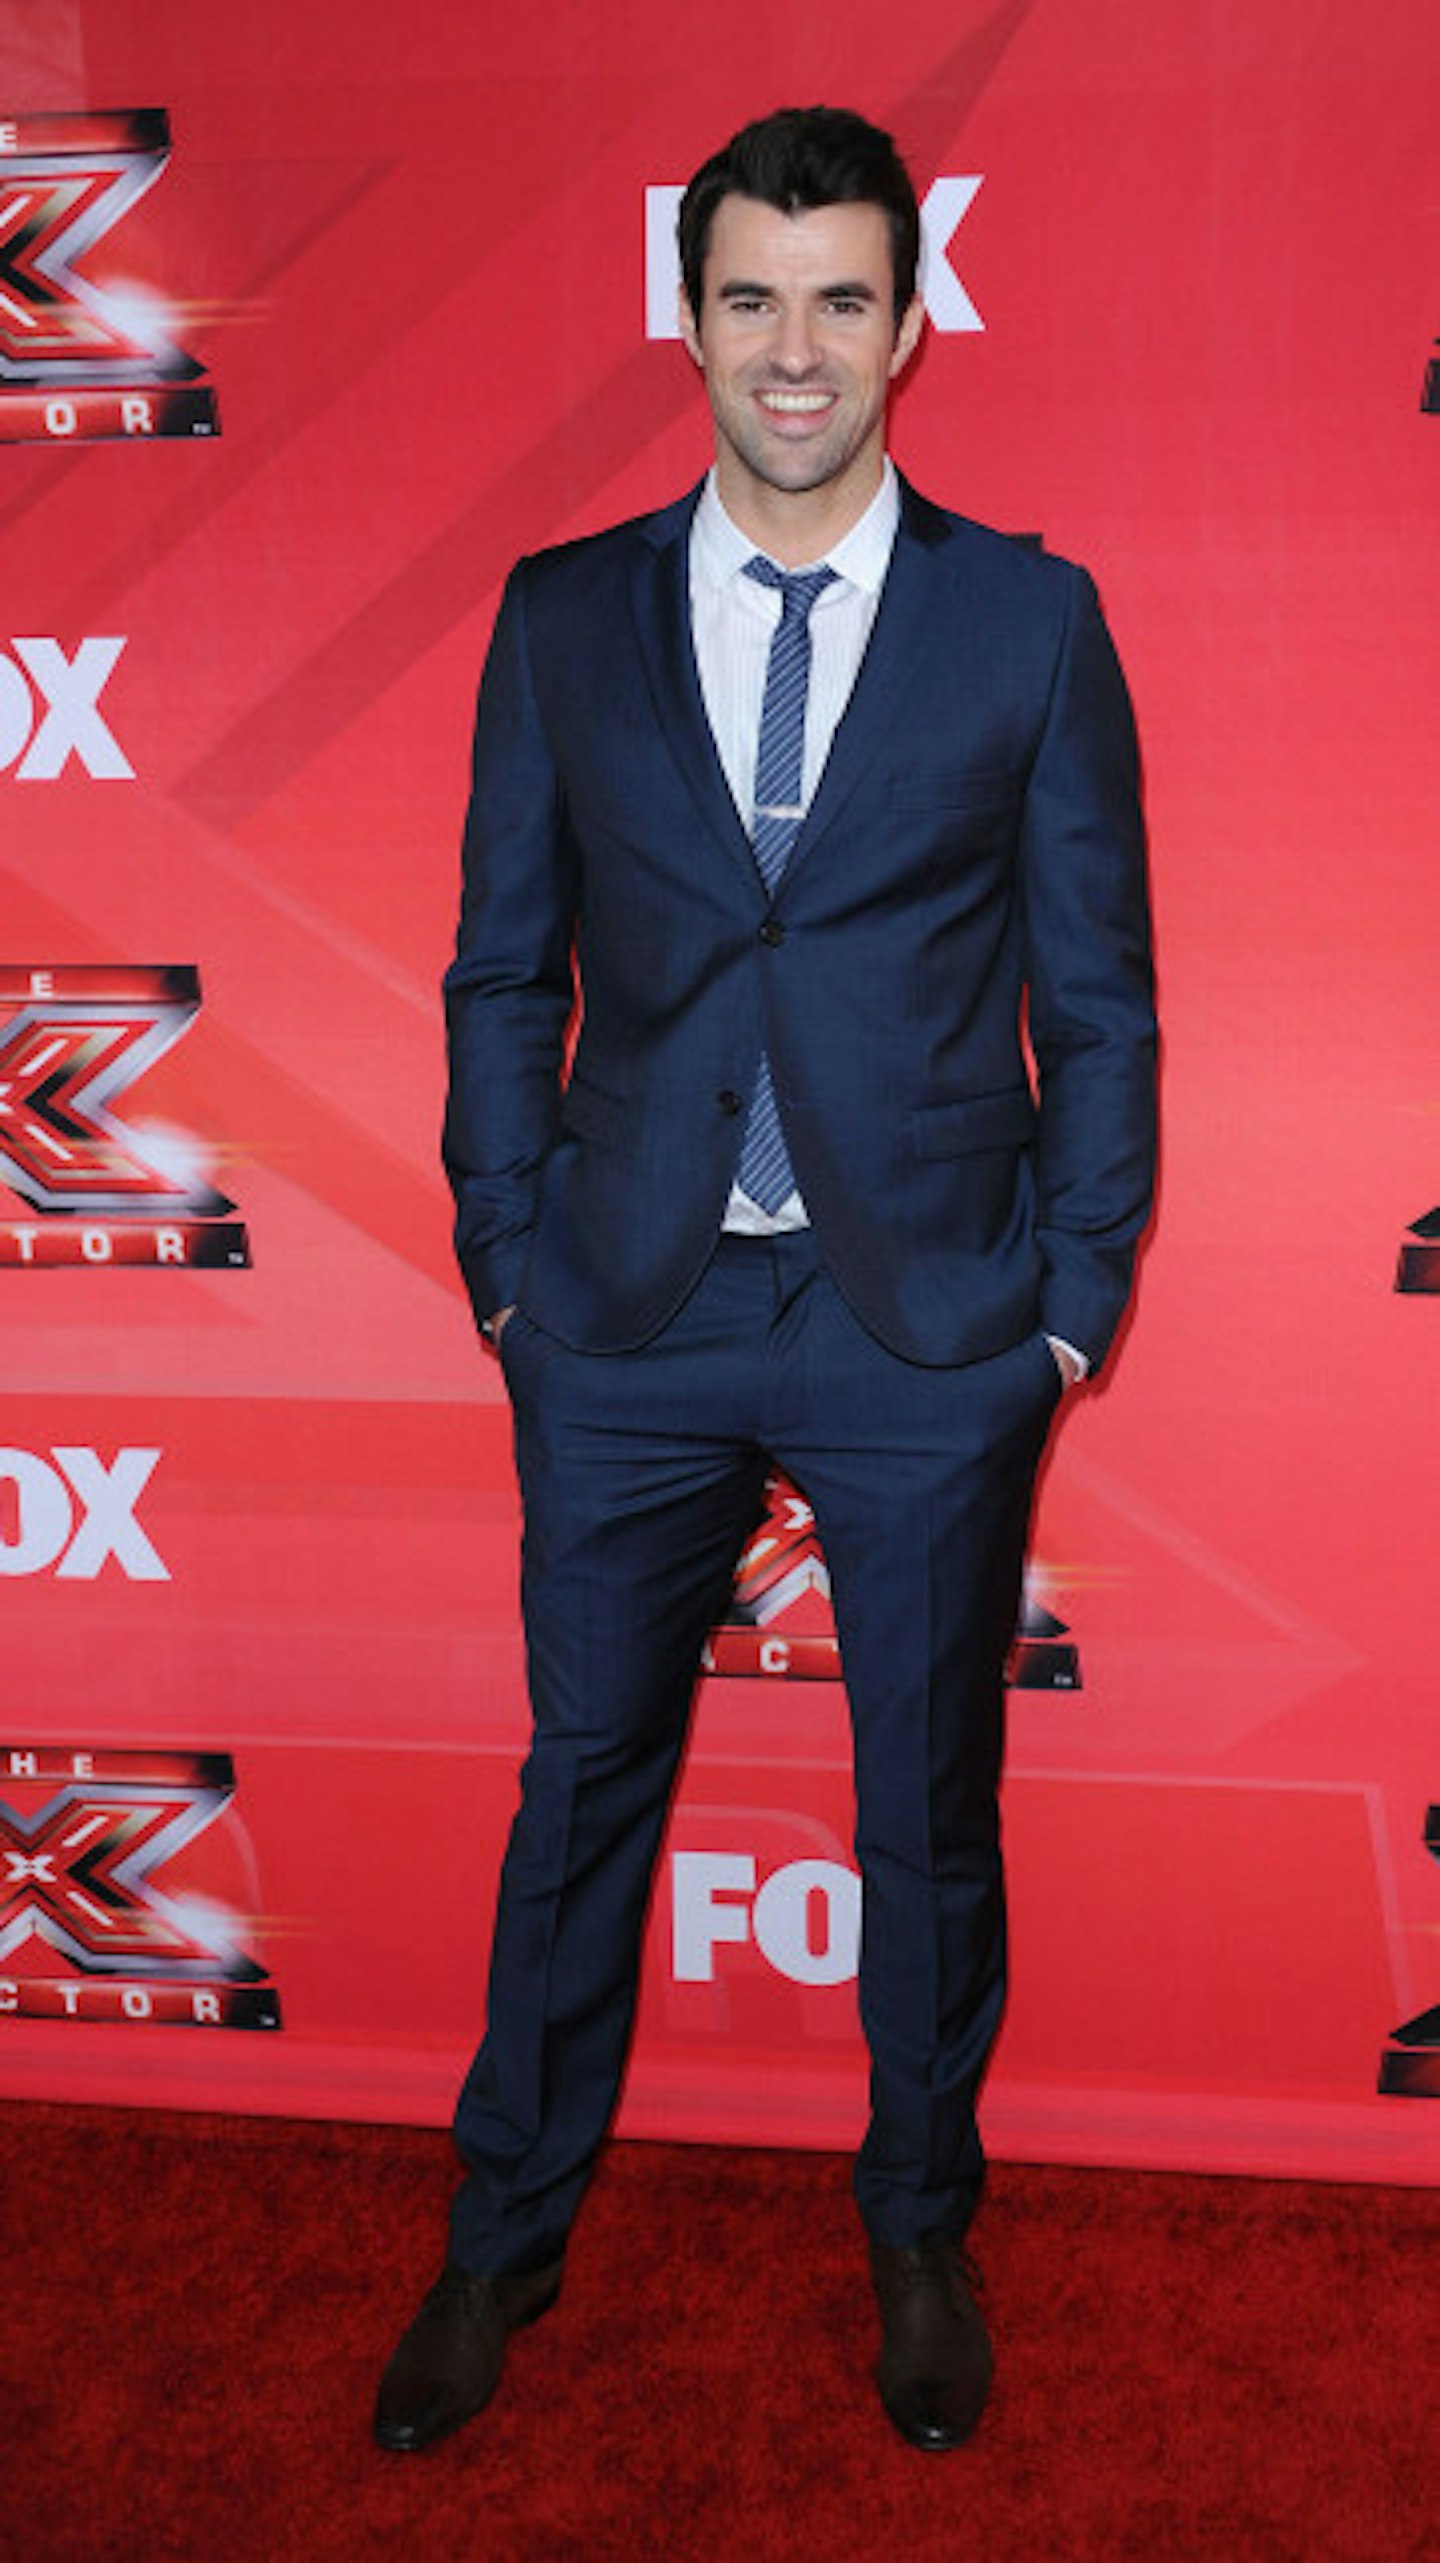 Steve hosted the first season of The X Factor USA in 2011